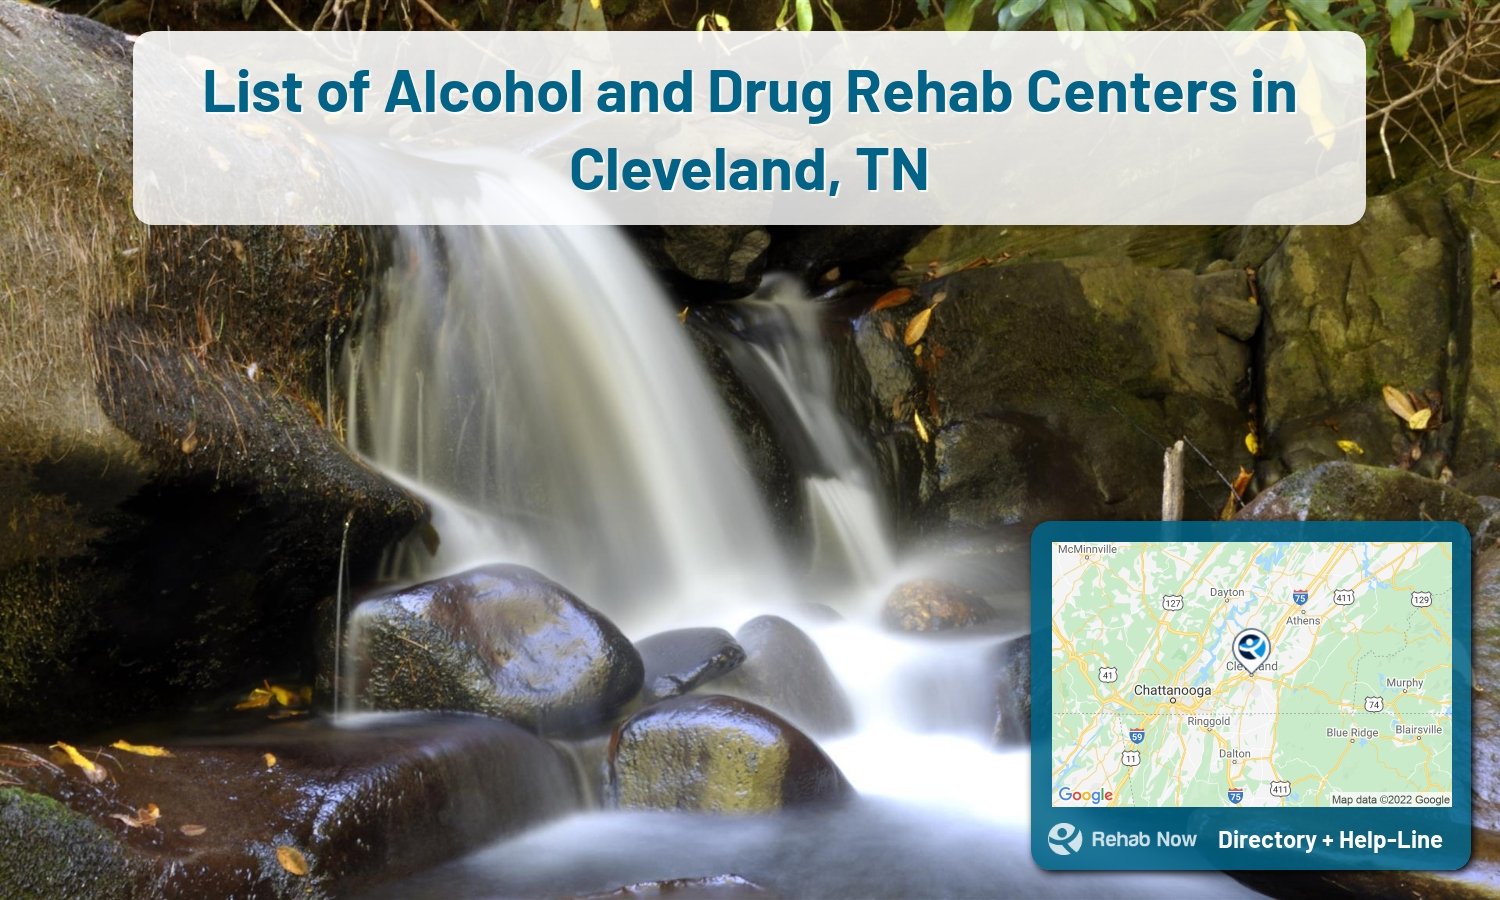 Ready to pick a rehab center in Cleveland? Get off alcohol, opiates, and other drugs, by selecting top drug rehab centers in Tennessee